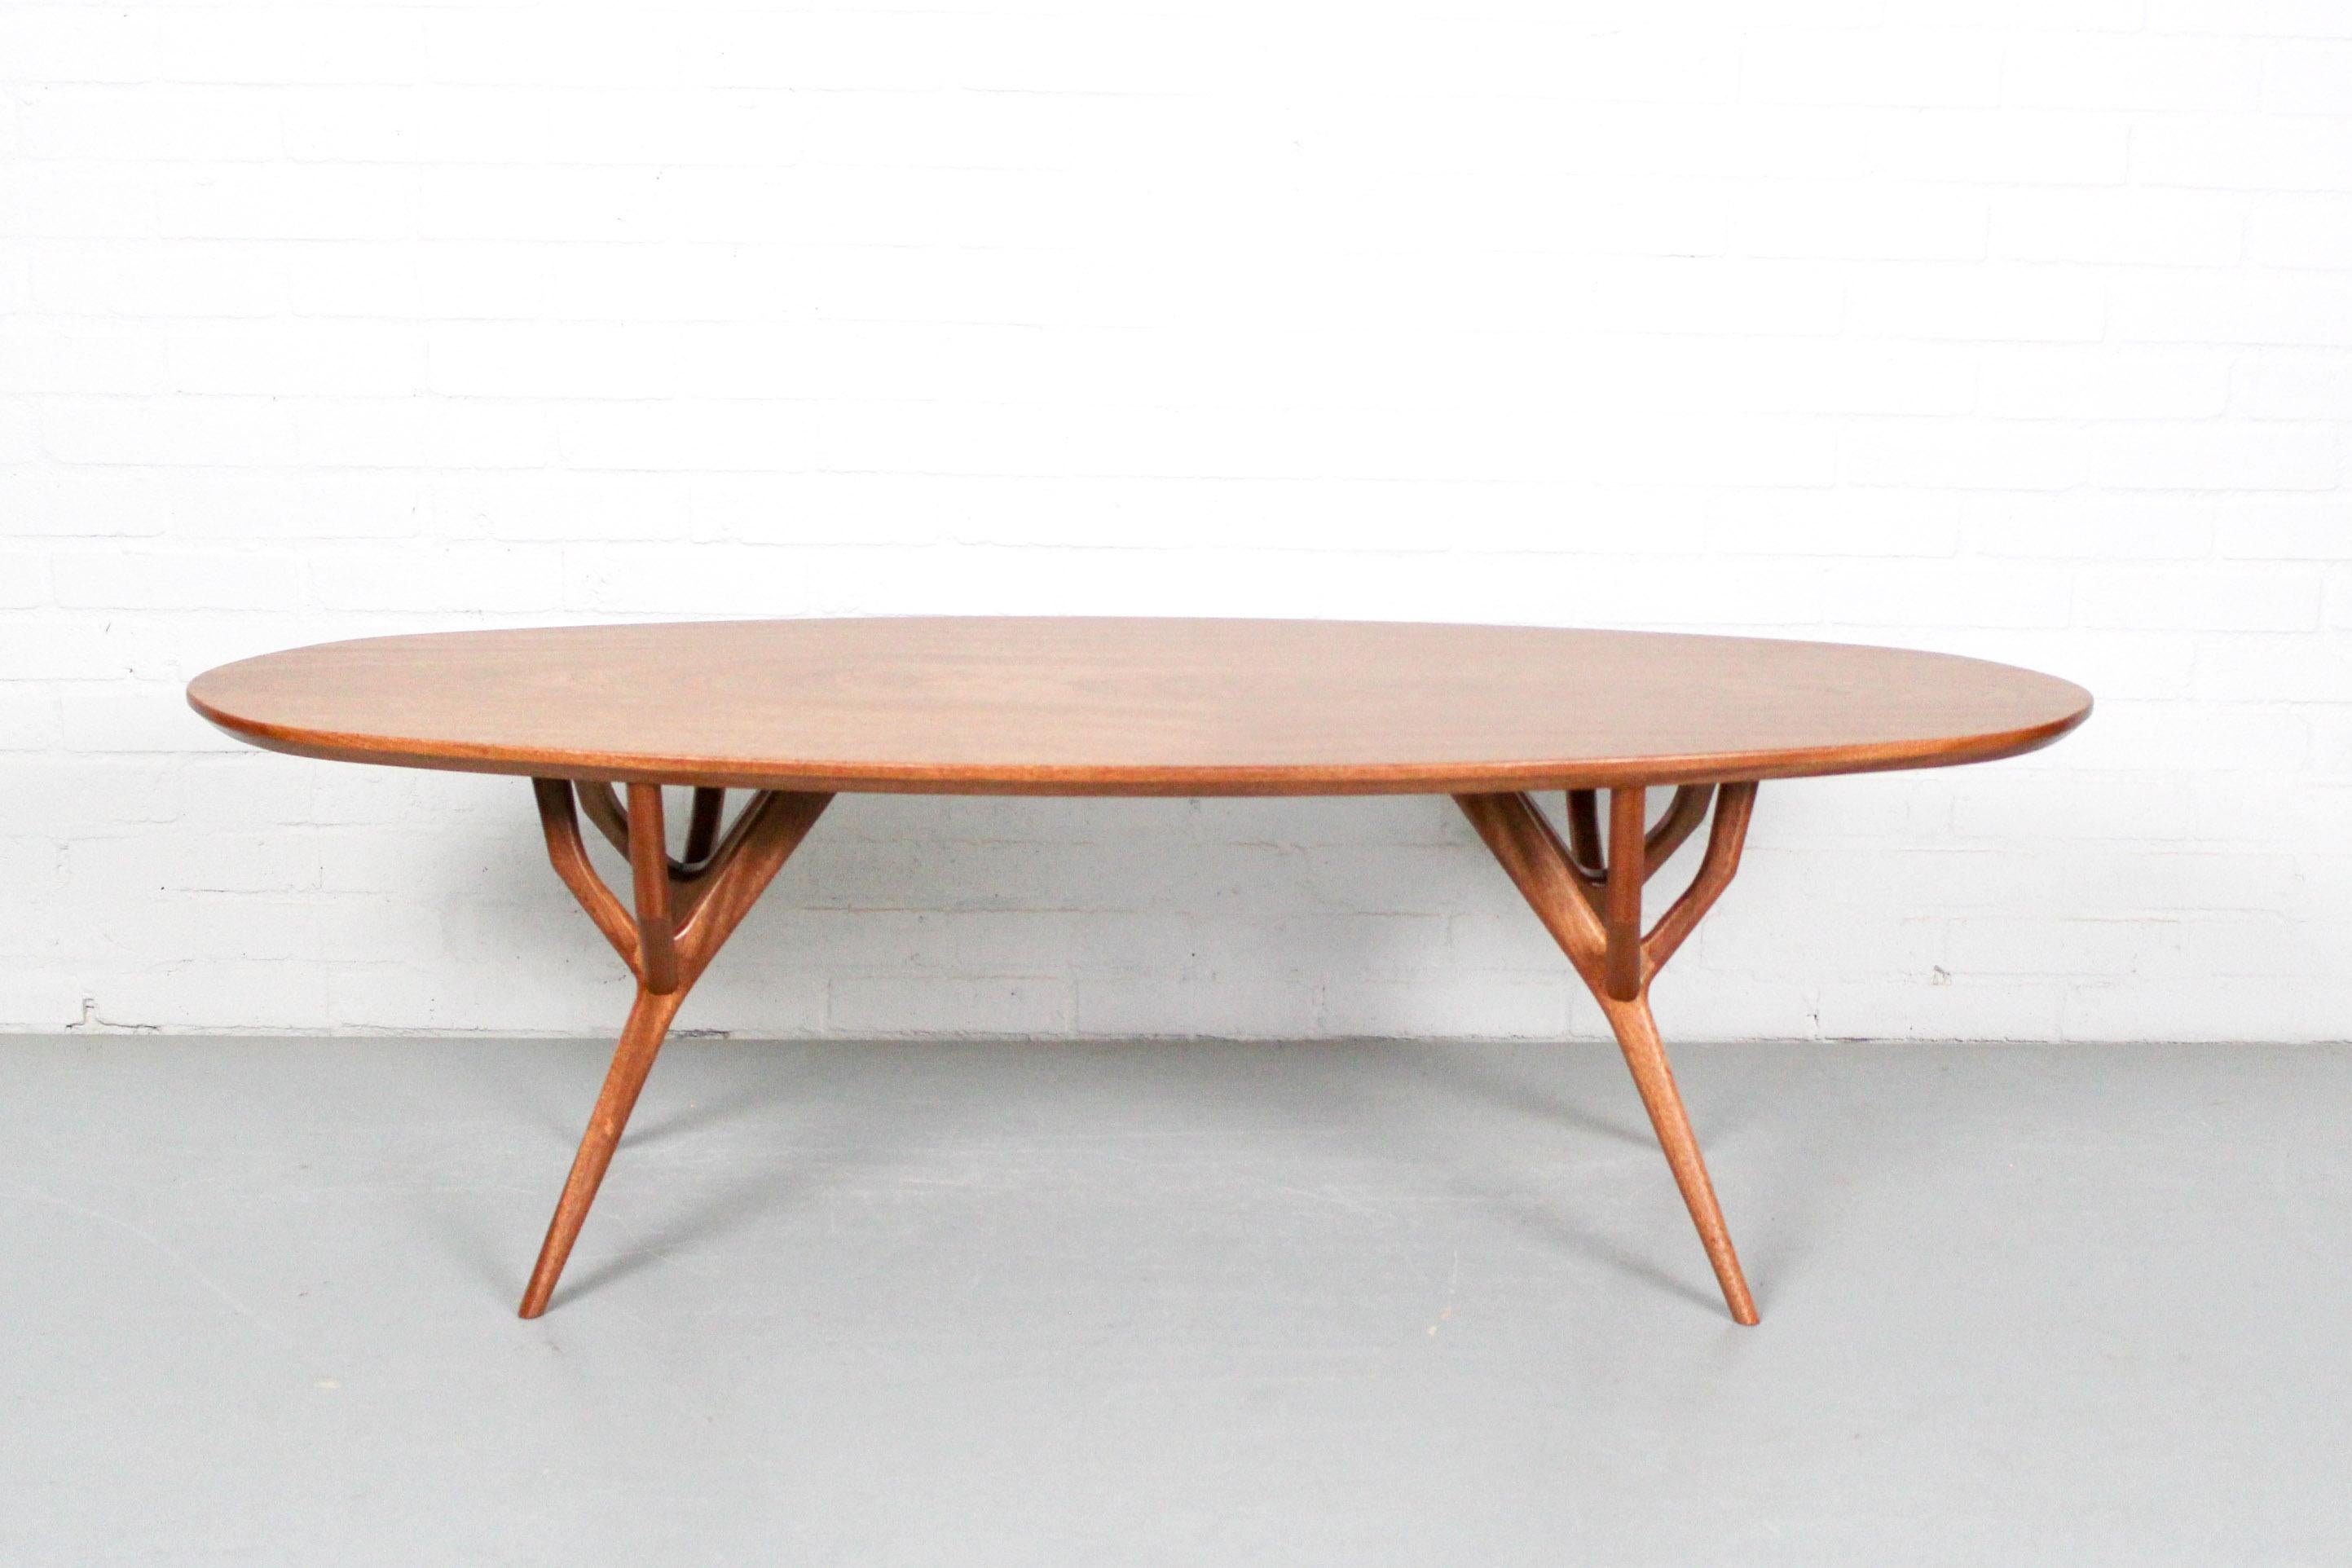 New mahogany coffee table with beautiful organic shapes. In the style of Vladimir Kagan, shows great craftsmanships. One of a kind and absolutely stunning.